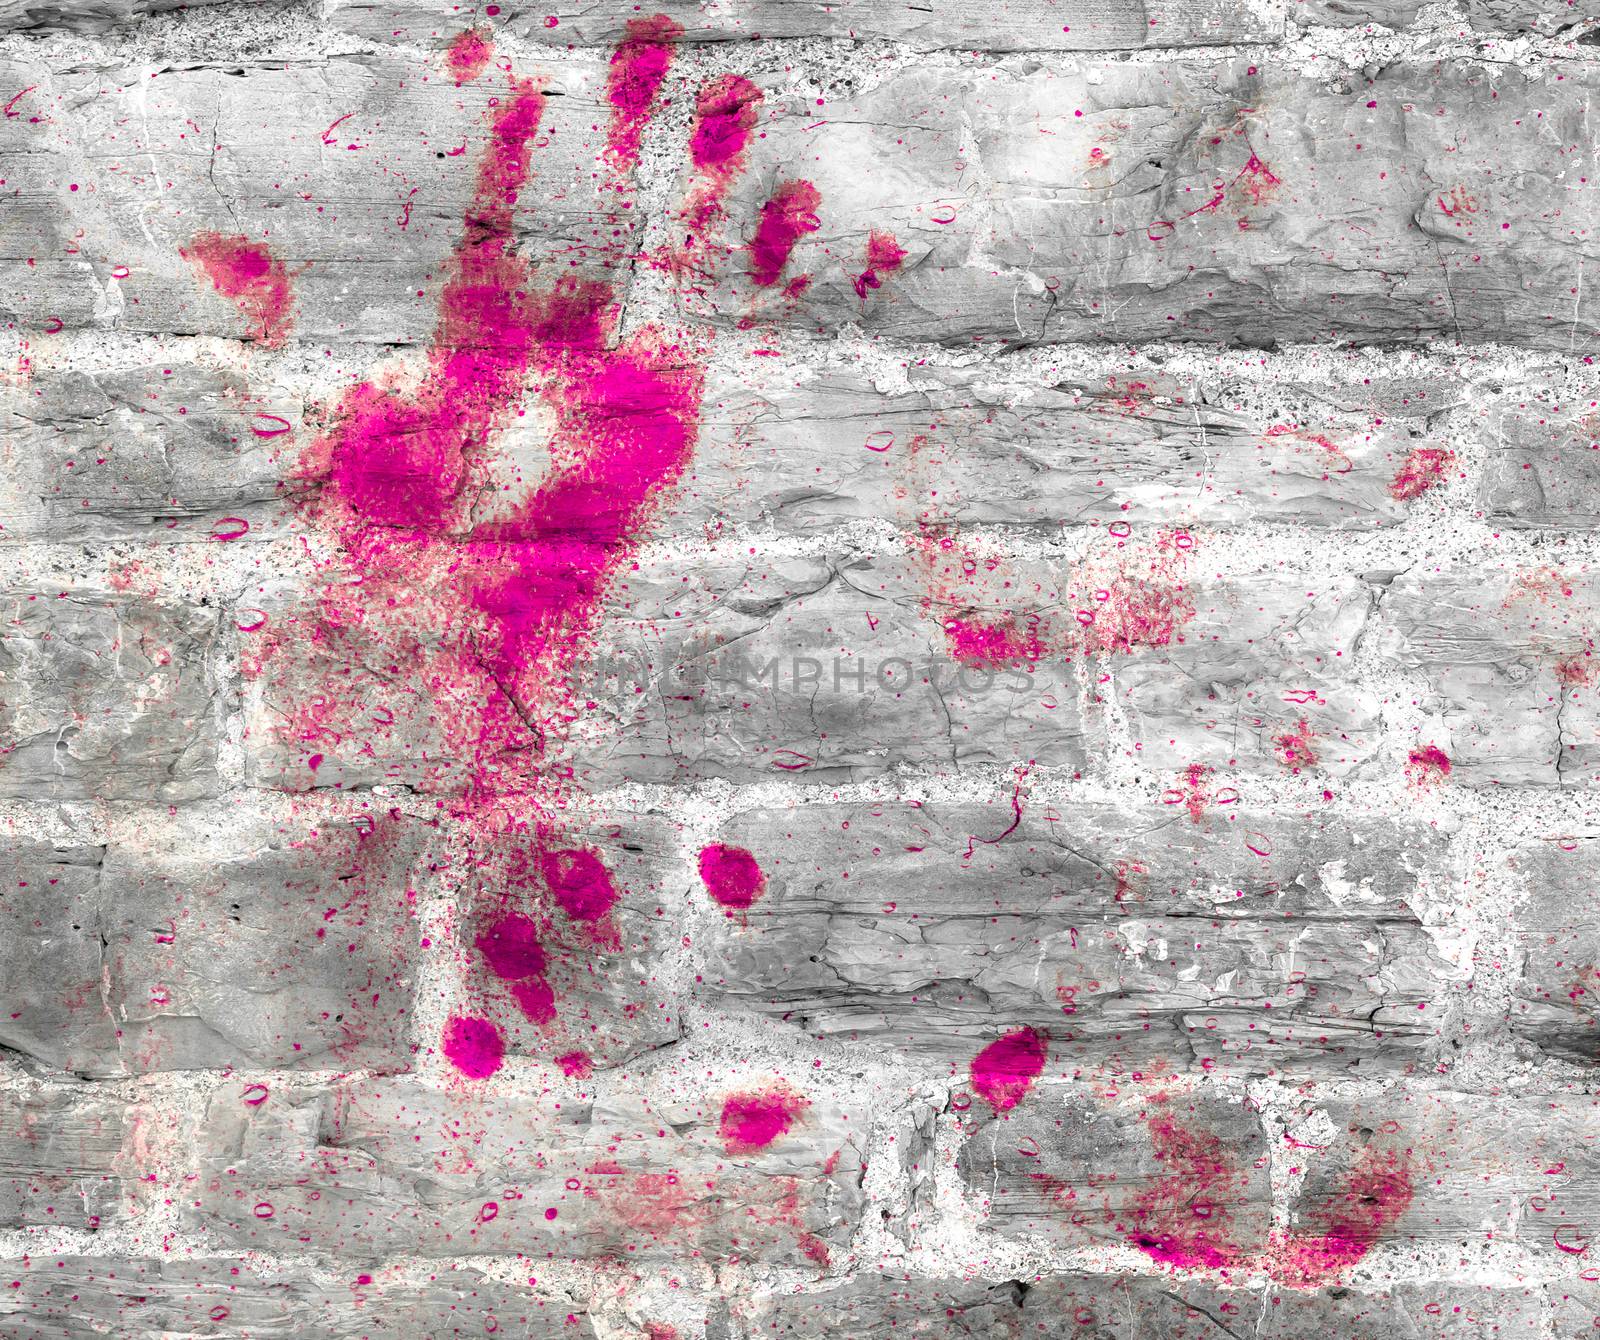 Pink handprint on stone wall. Ideal for your creative background.